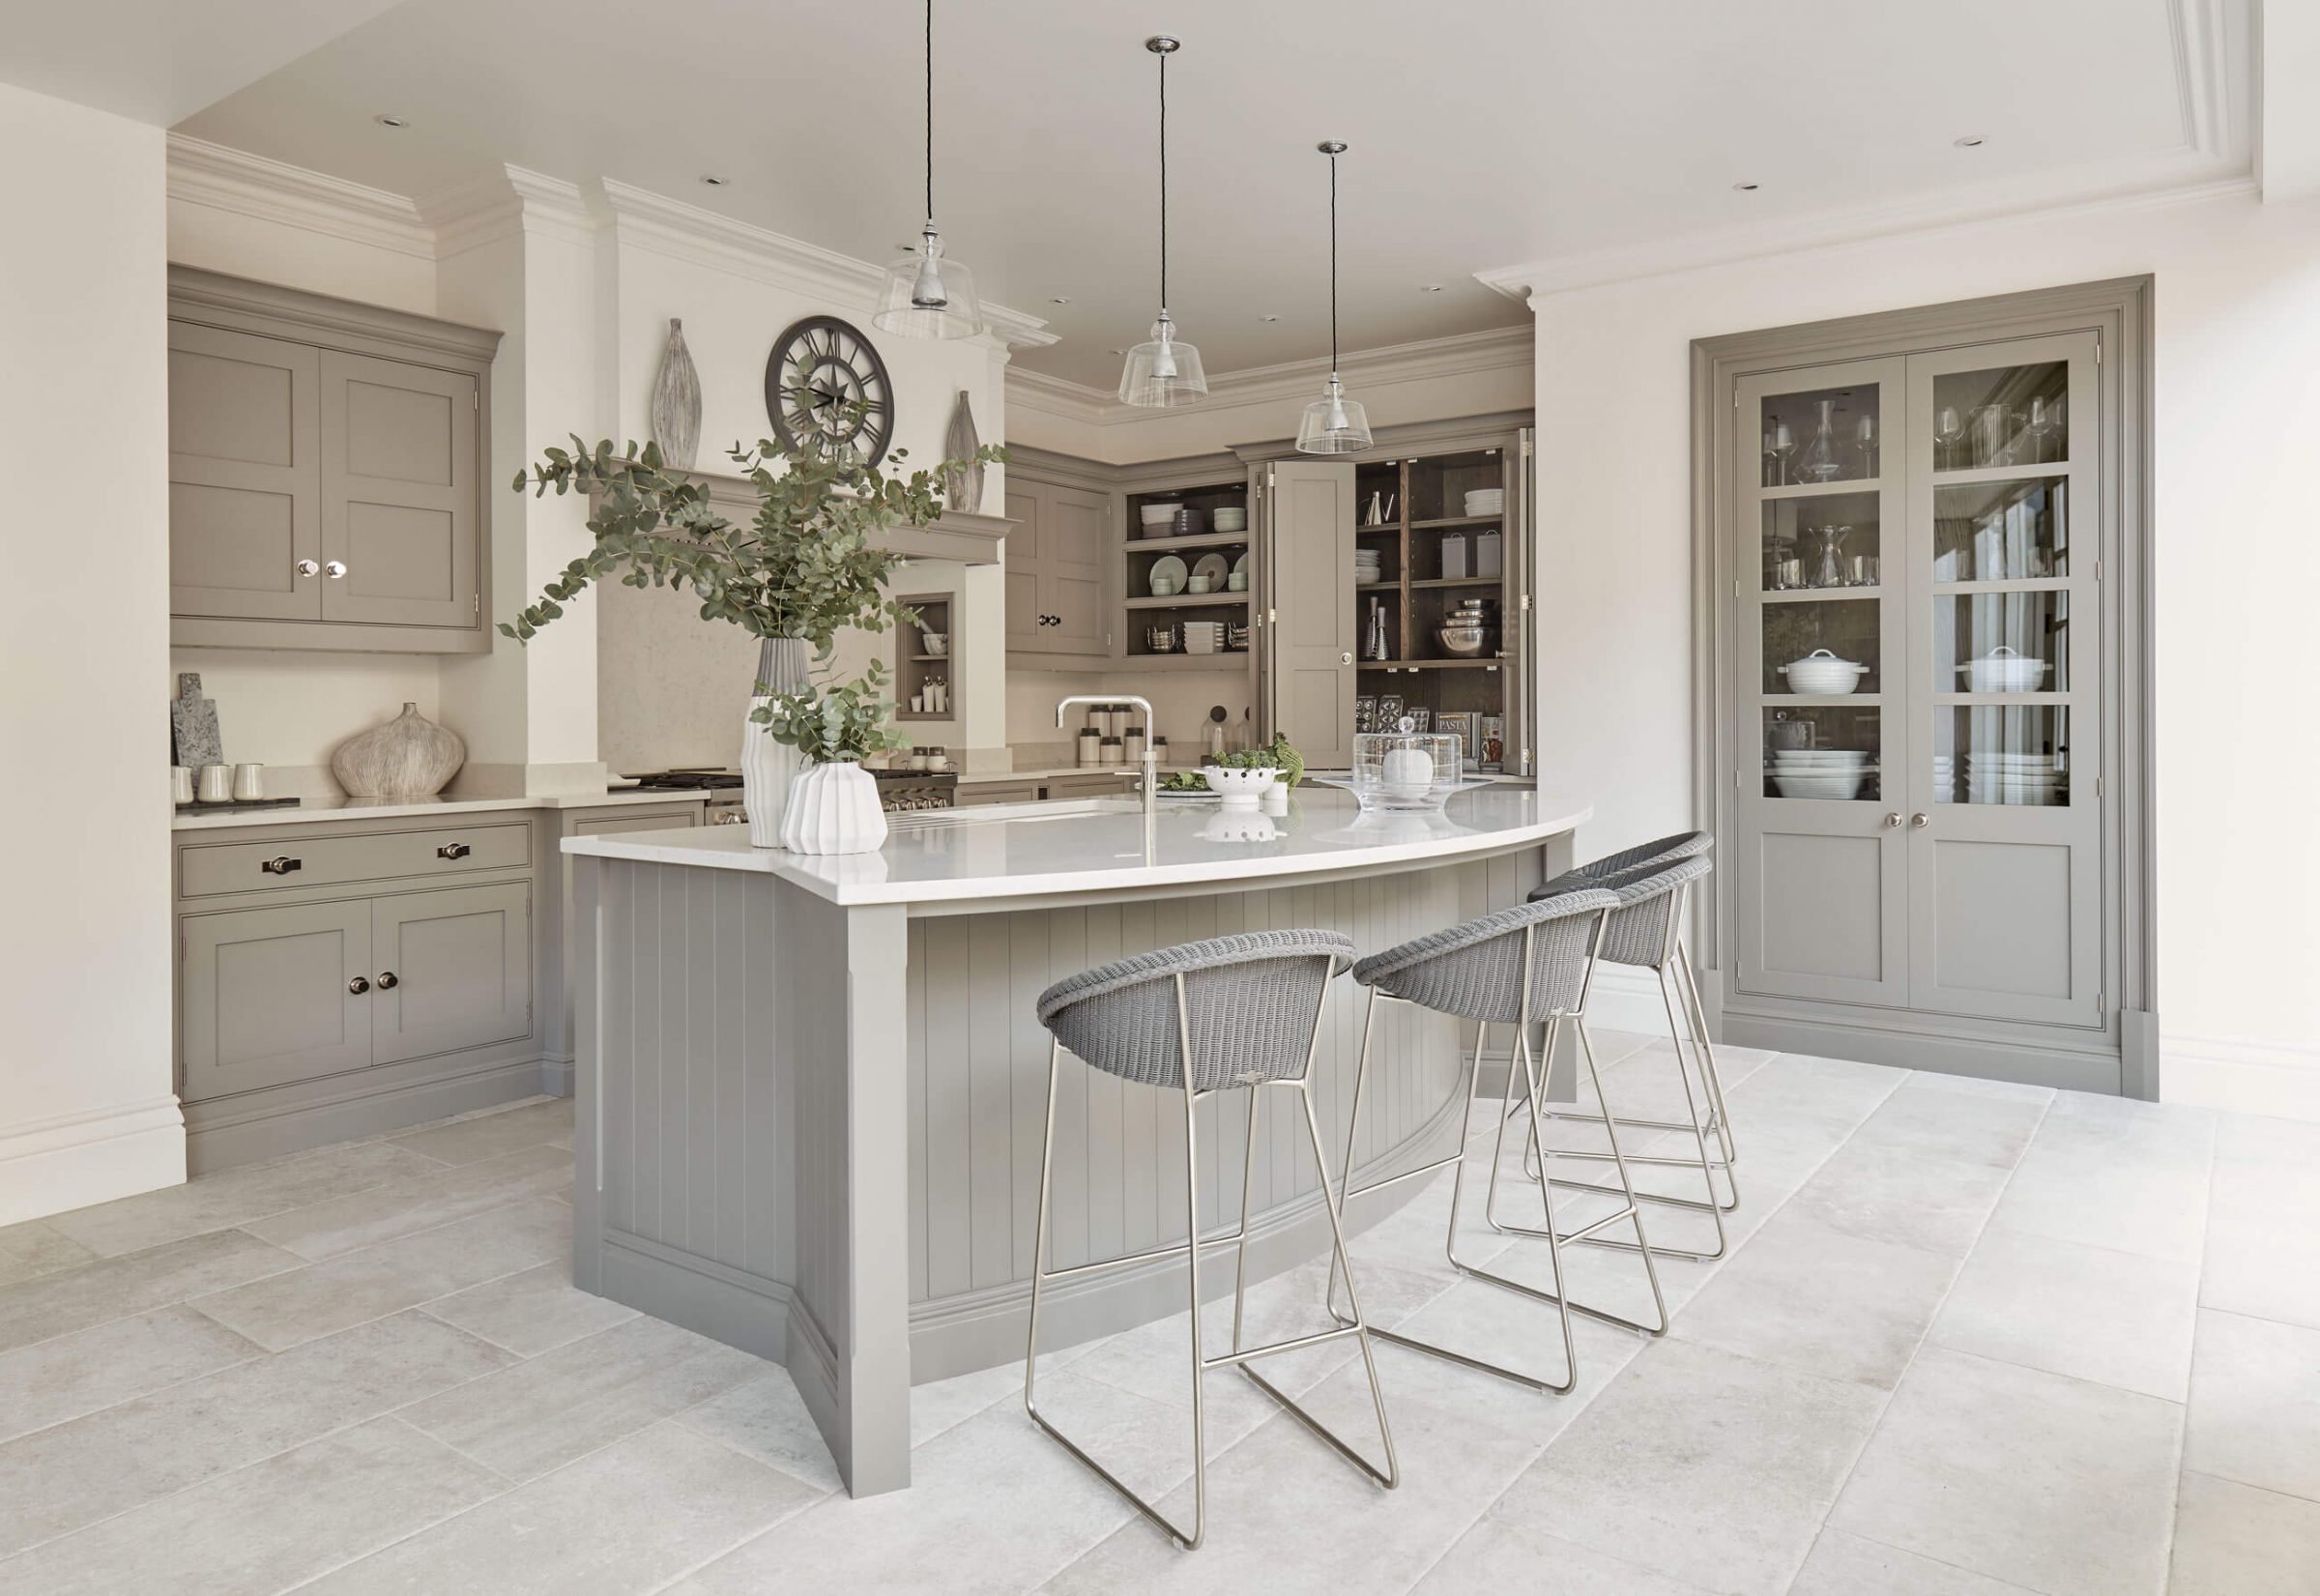 Tom Howley Kitchens - BHID Group